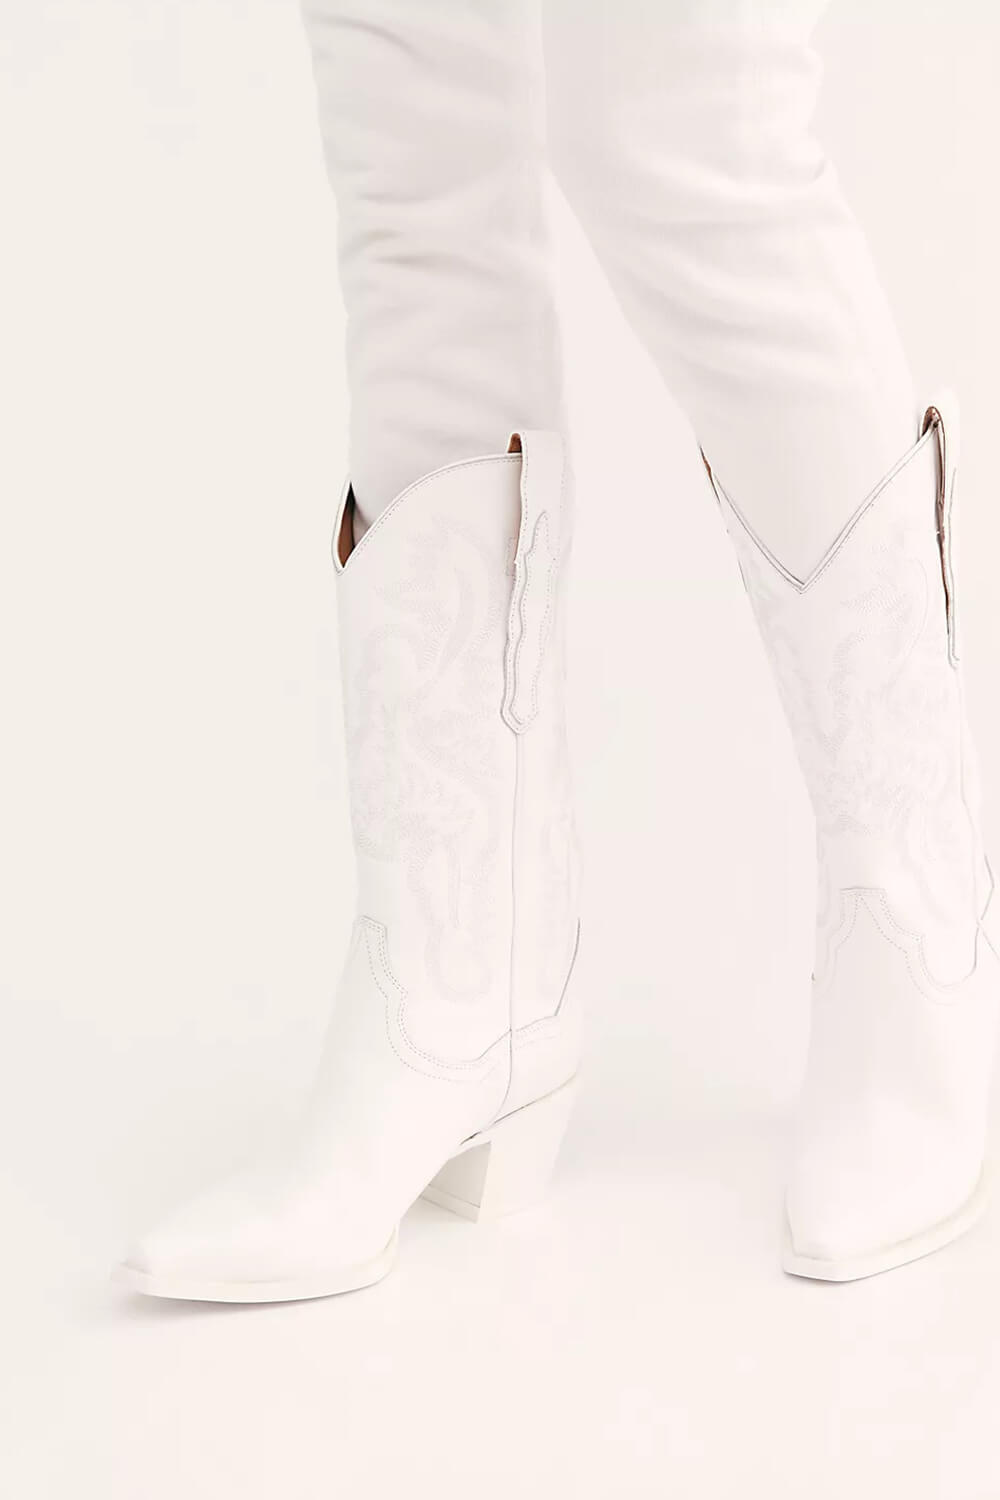 White Embroidered Detail Pointed Toe Western Inspired Mid Calf Block Heel Boots